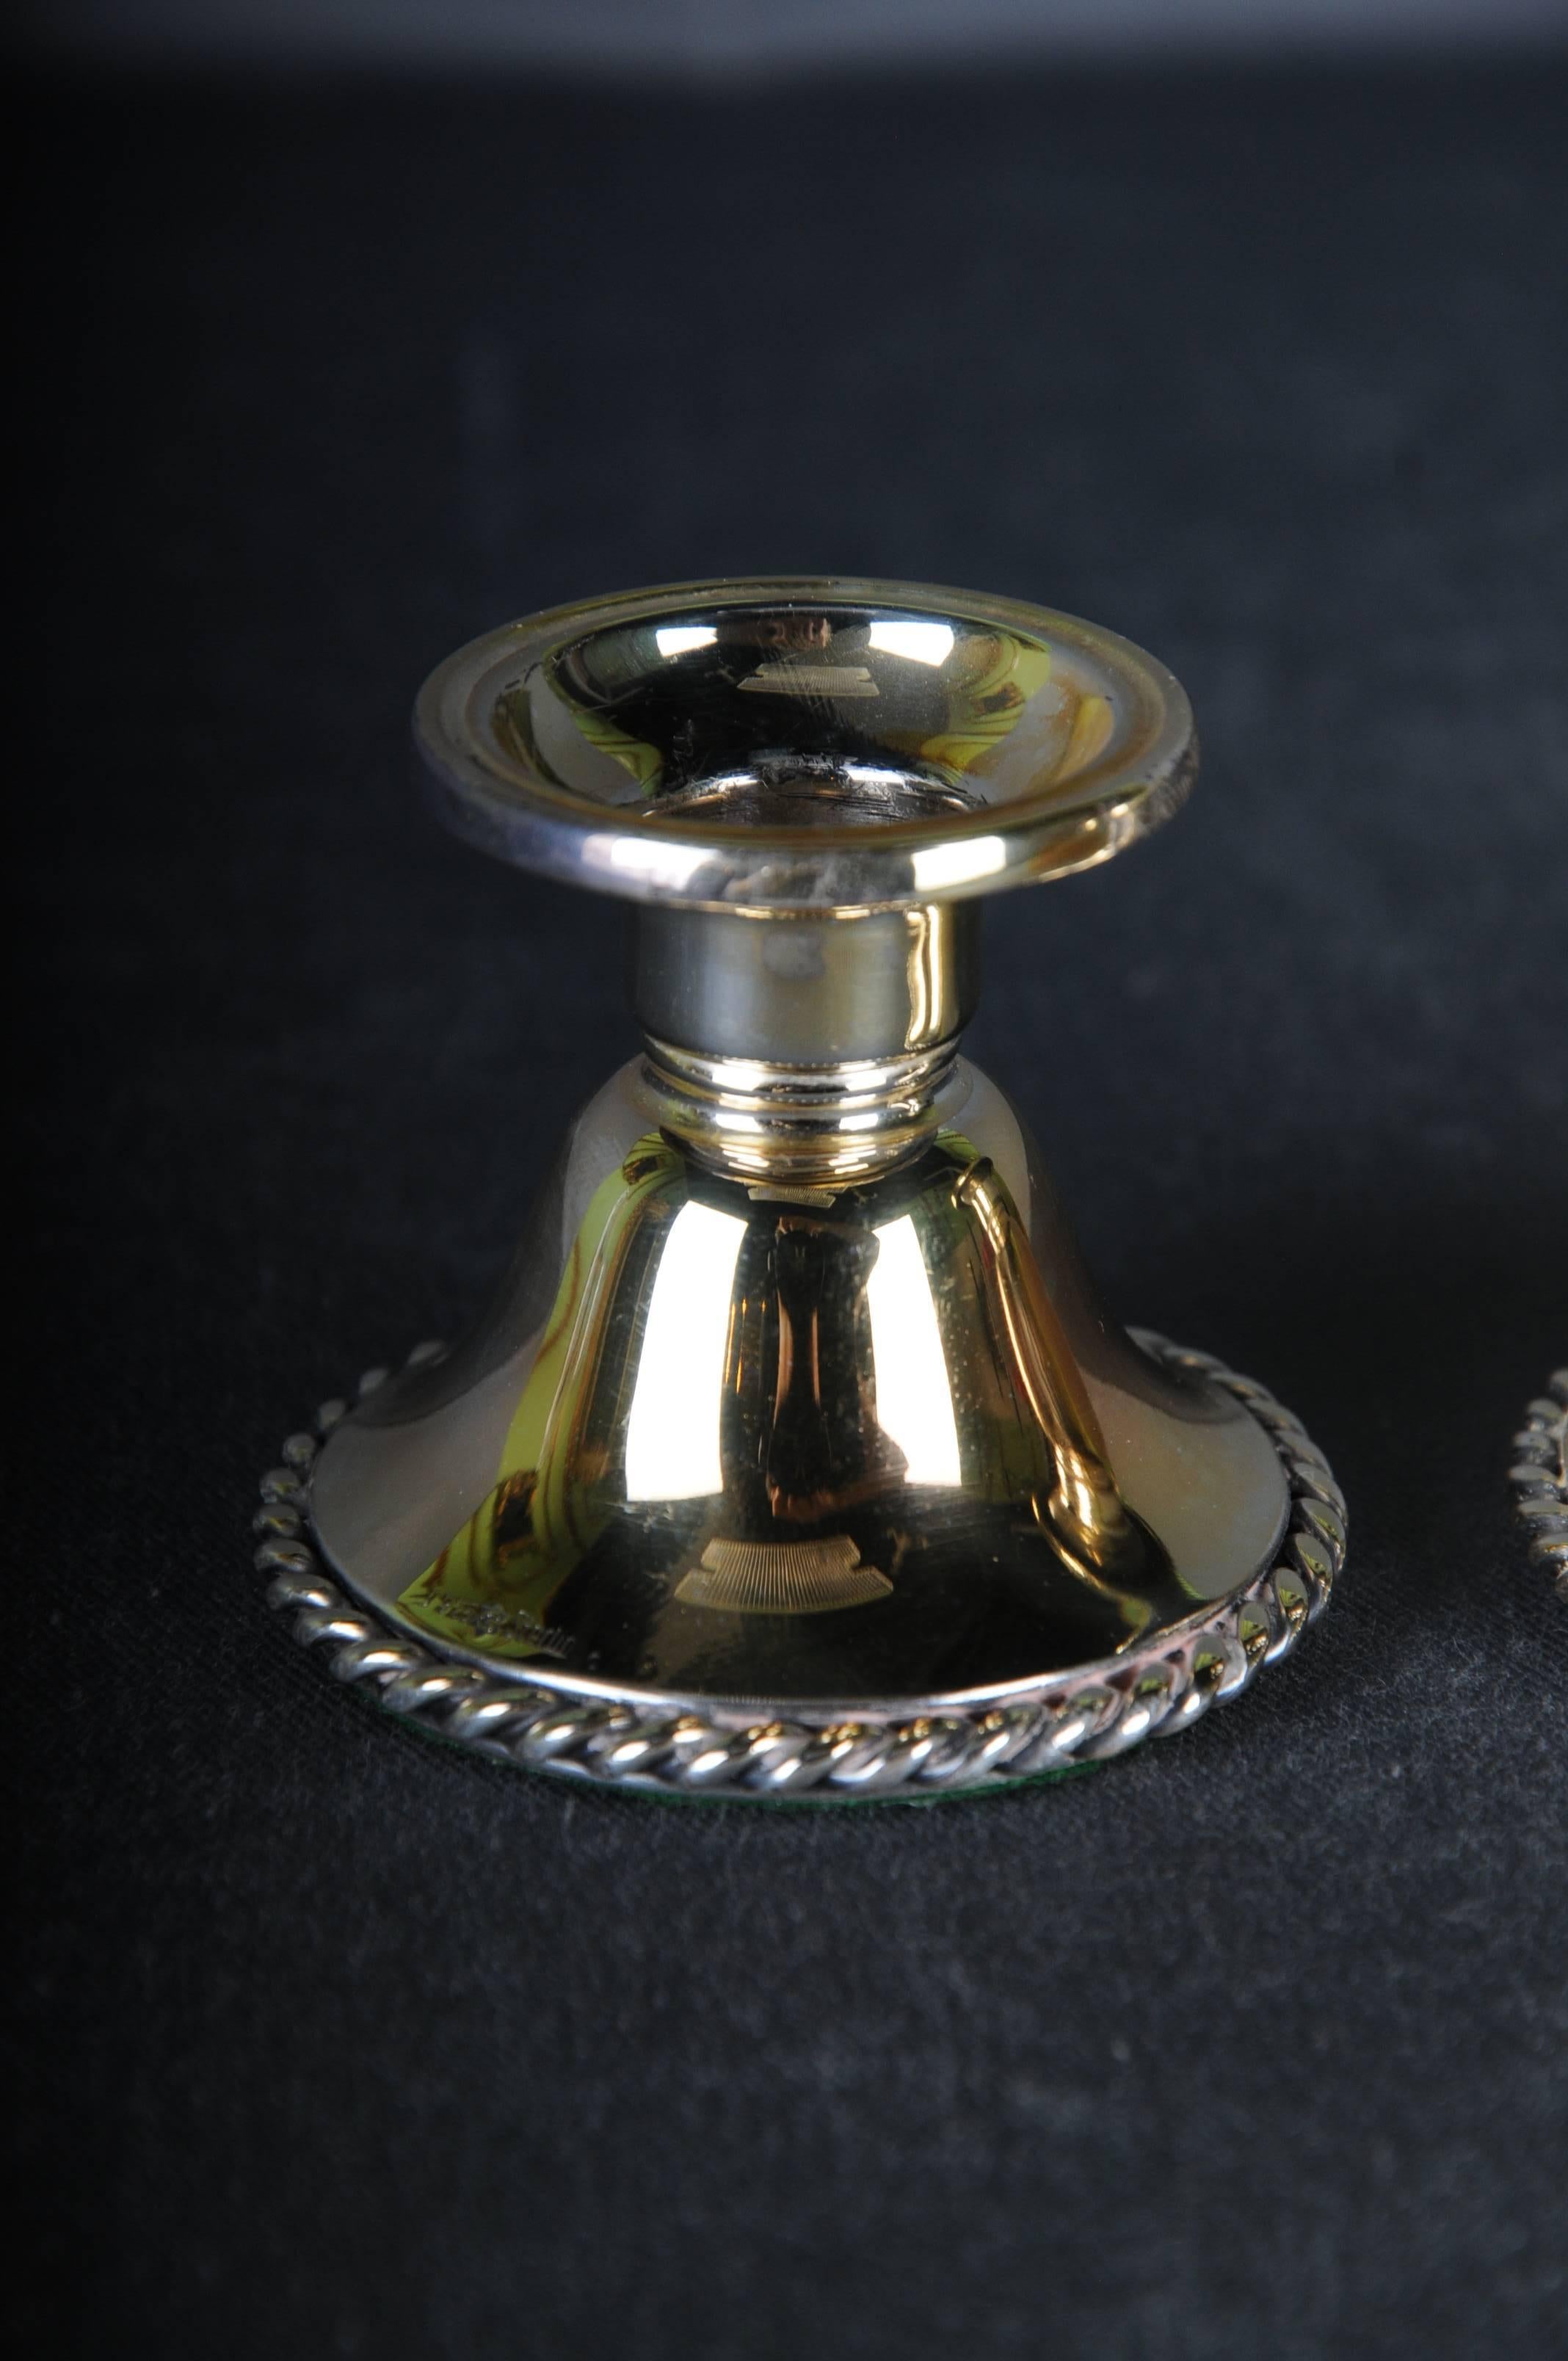 2 classic Silver Candlestick 925 Sterling Germany
Half moon and crown gilded



The candlestick is weighted
Weight: 126 g

The condition can be seen in the pictures.